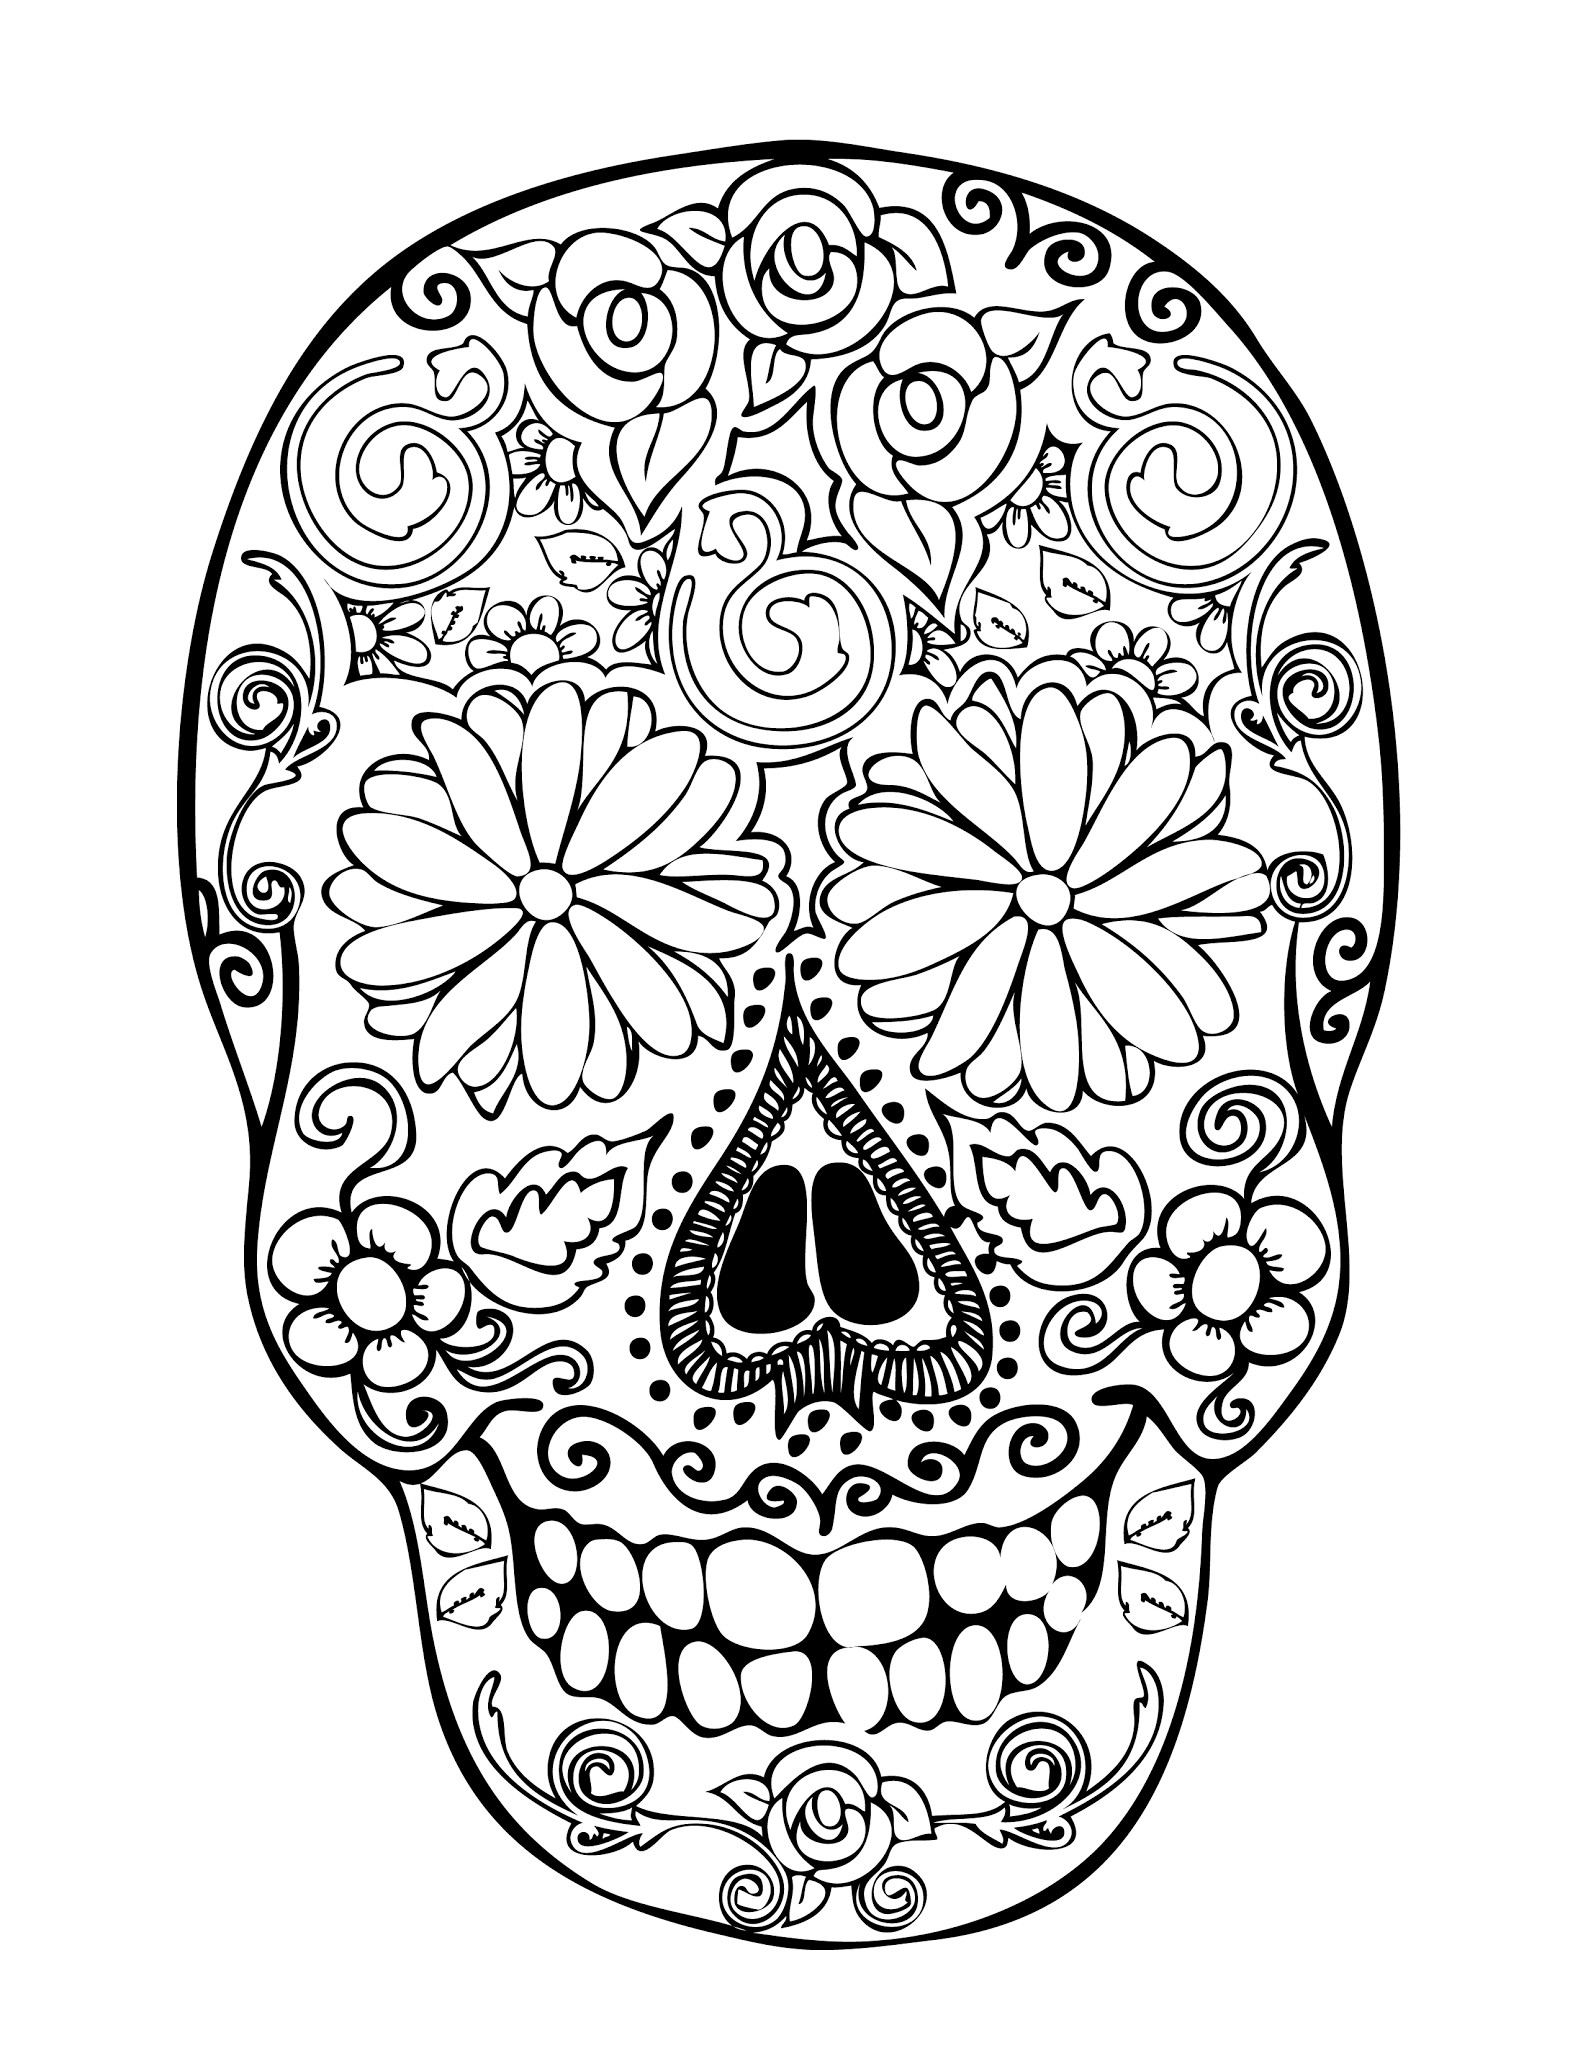 Printable Sugar Skull Coloring Pages
 28 skull coloring pages for kids Print Color Craft